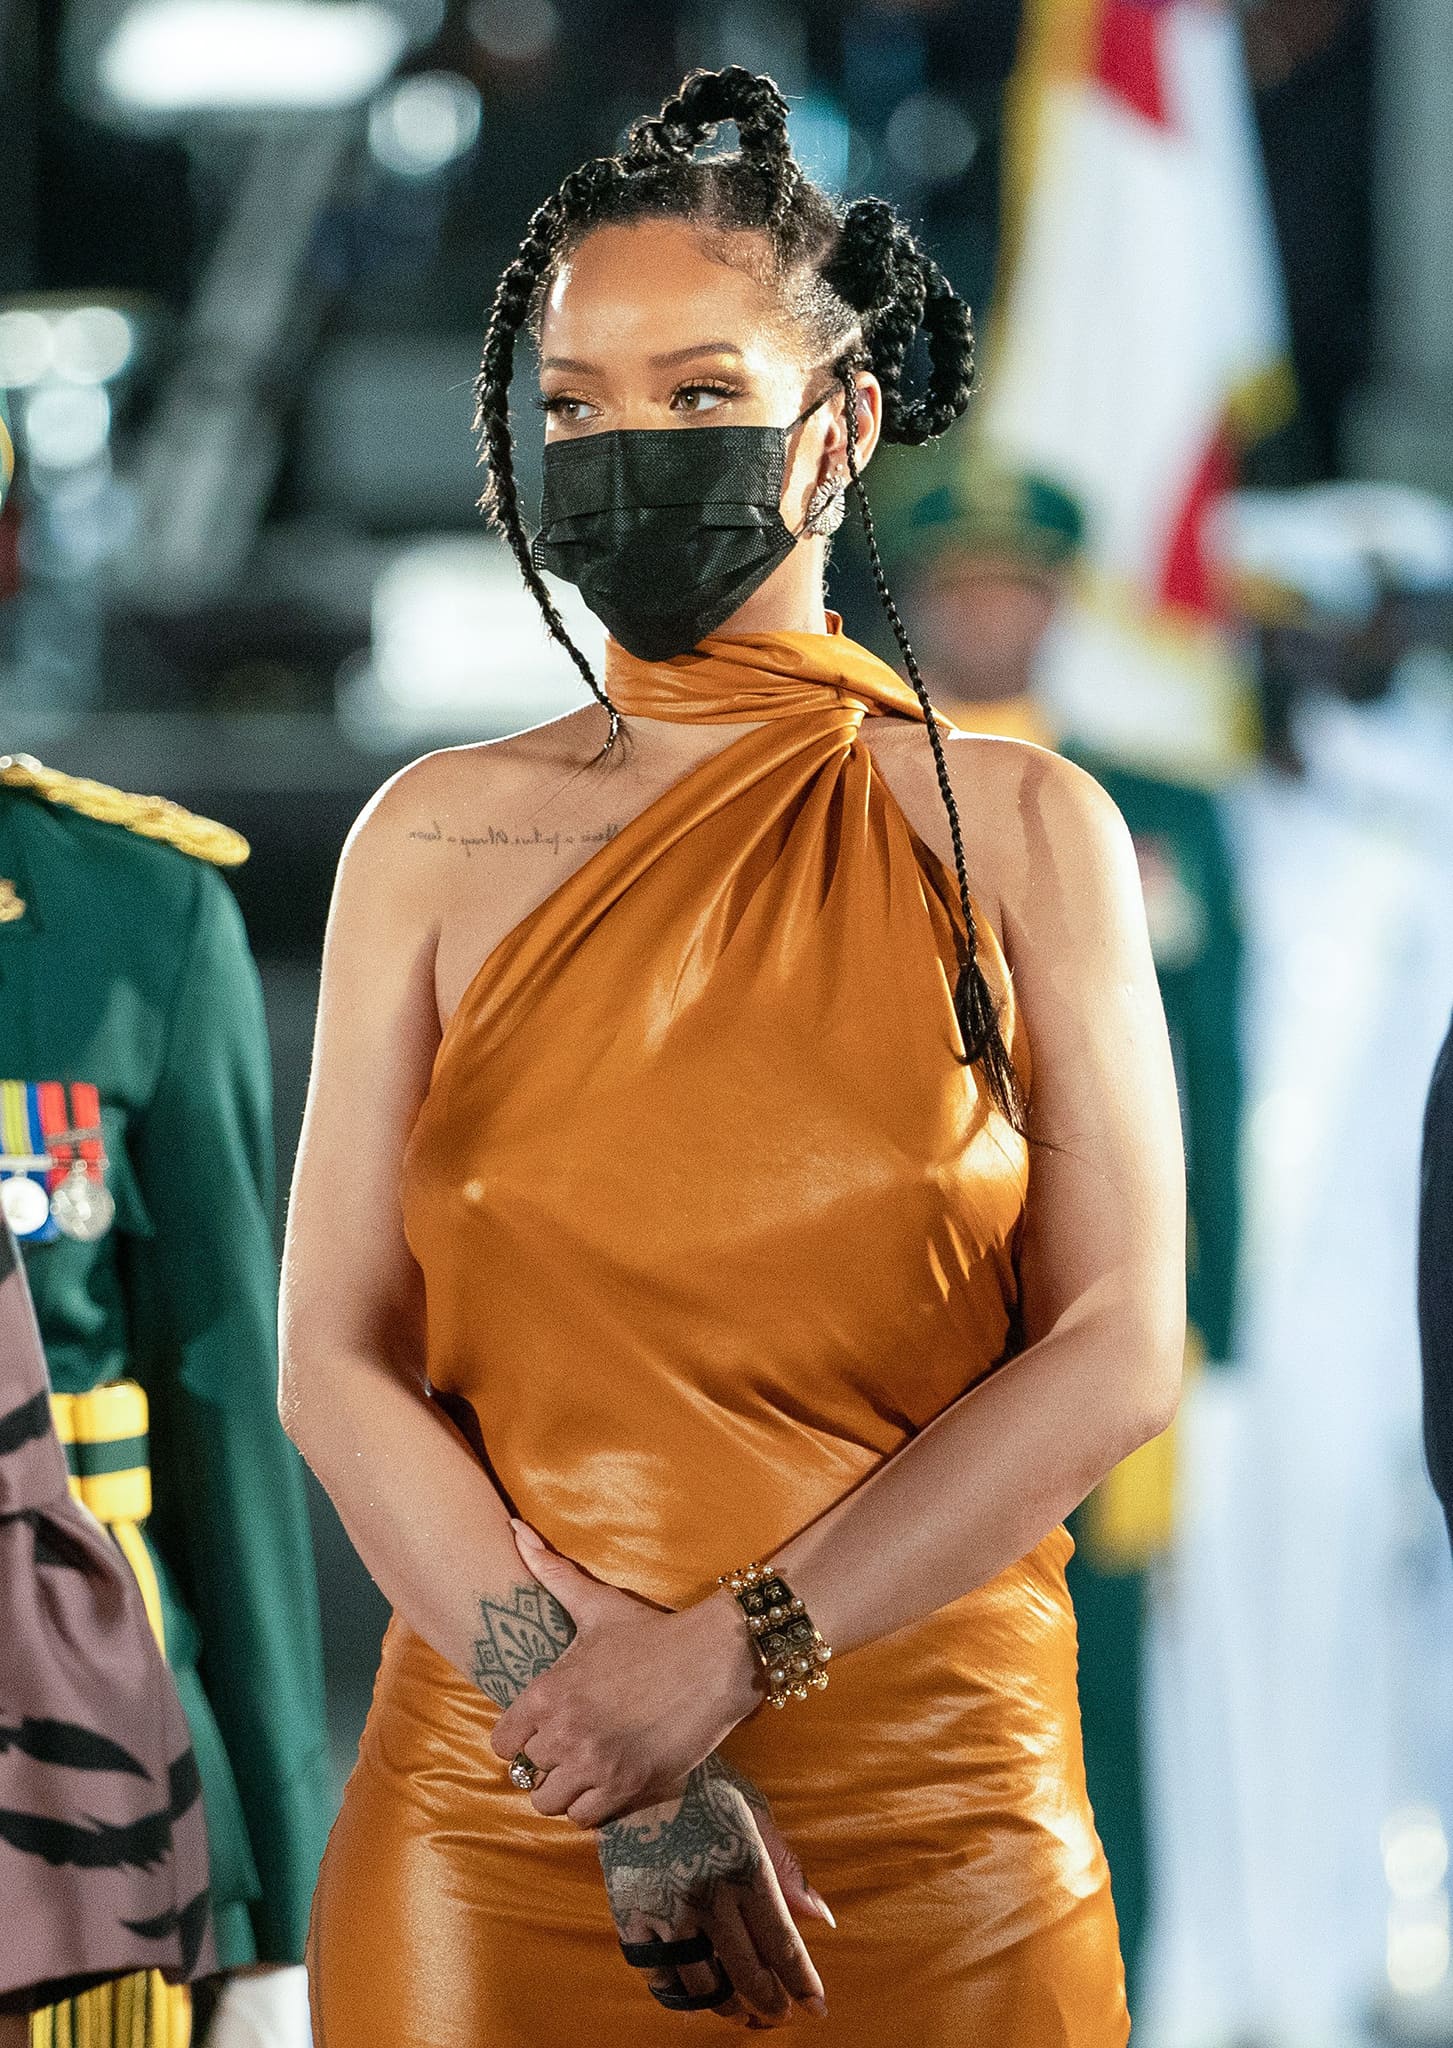 Rihanna's dress is made from fluid twill and features a halter neck